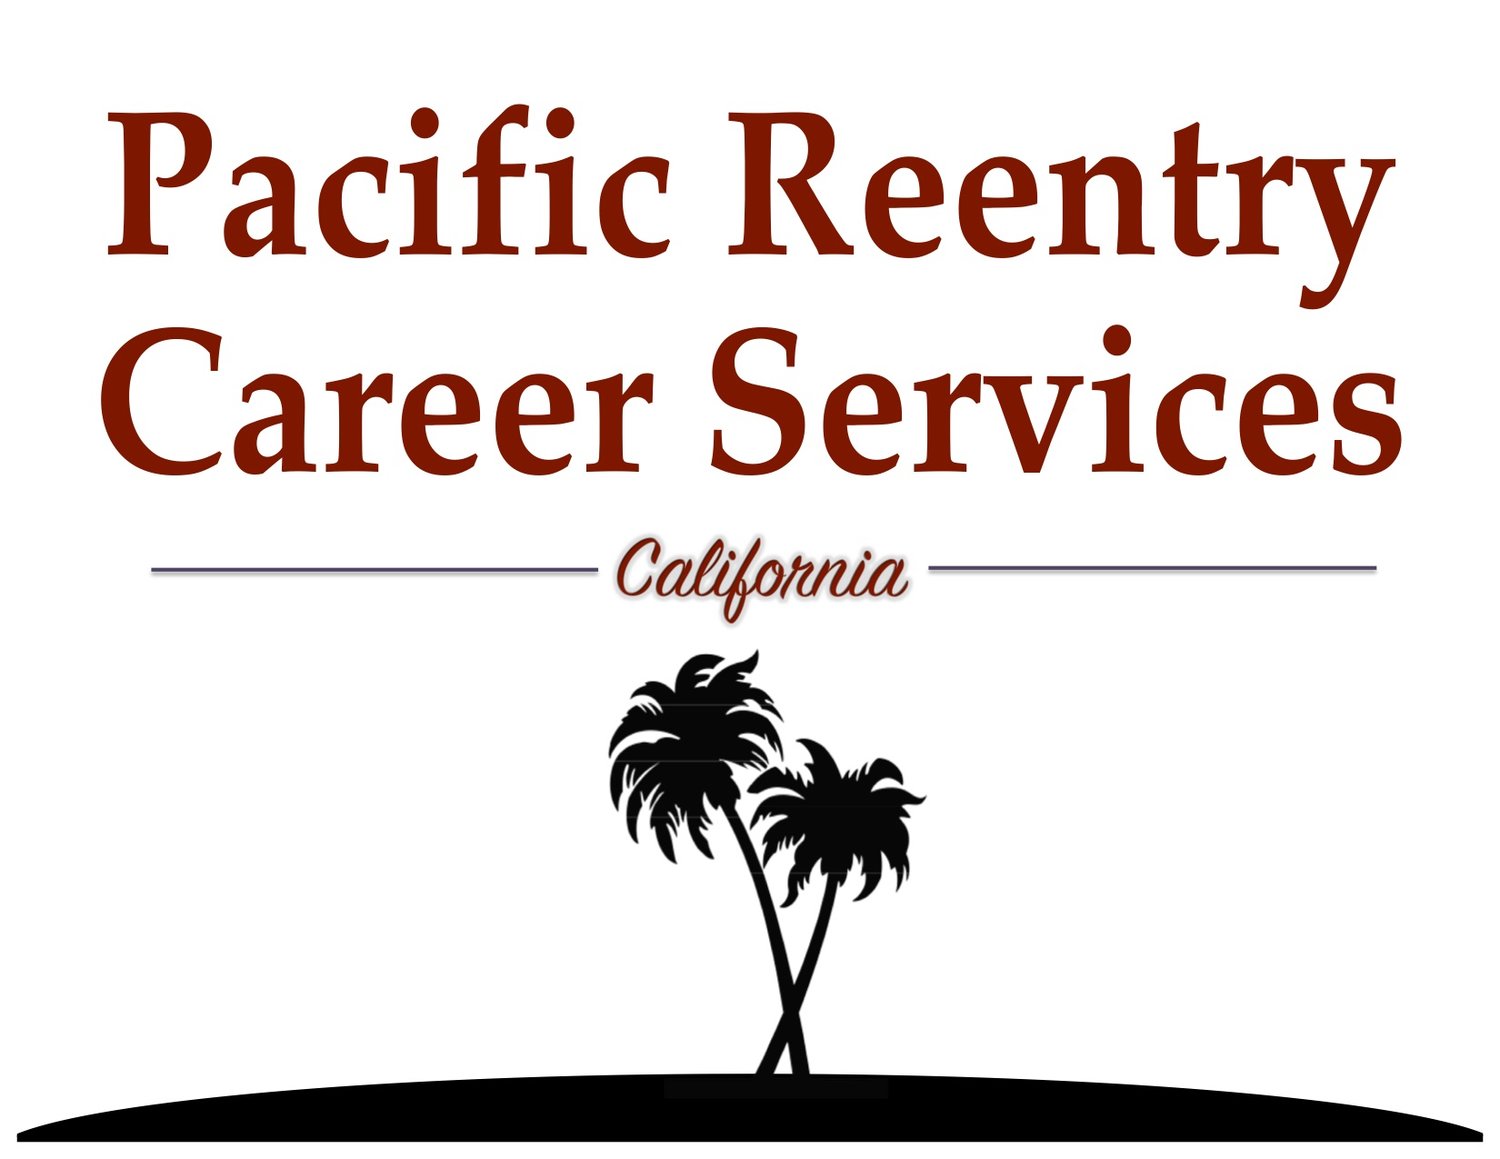 Pacific Reentry Career Services